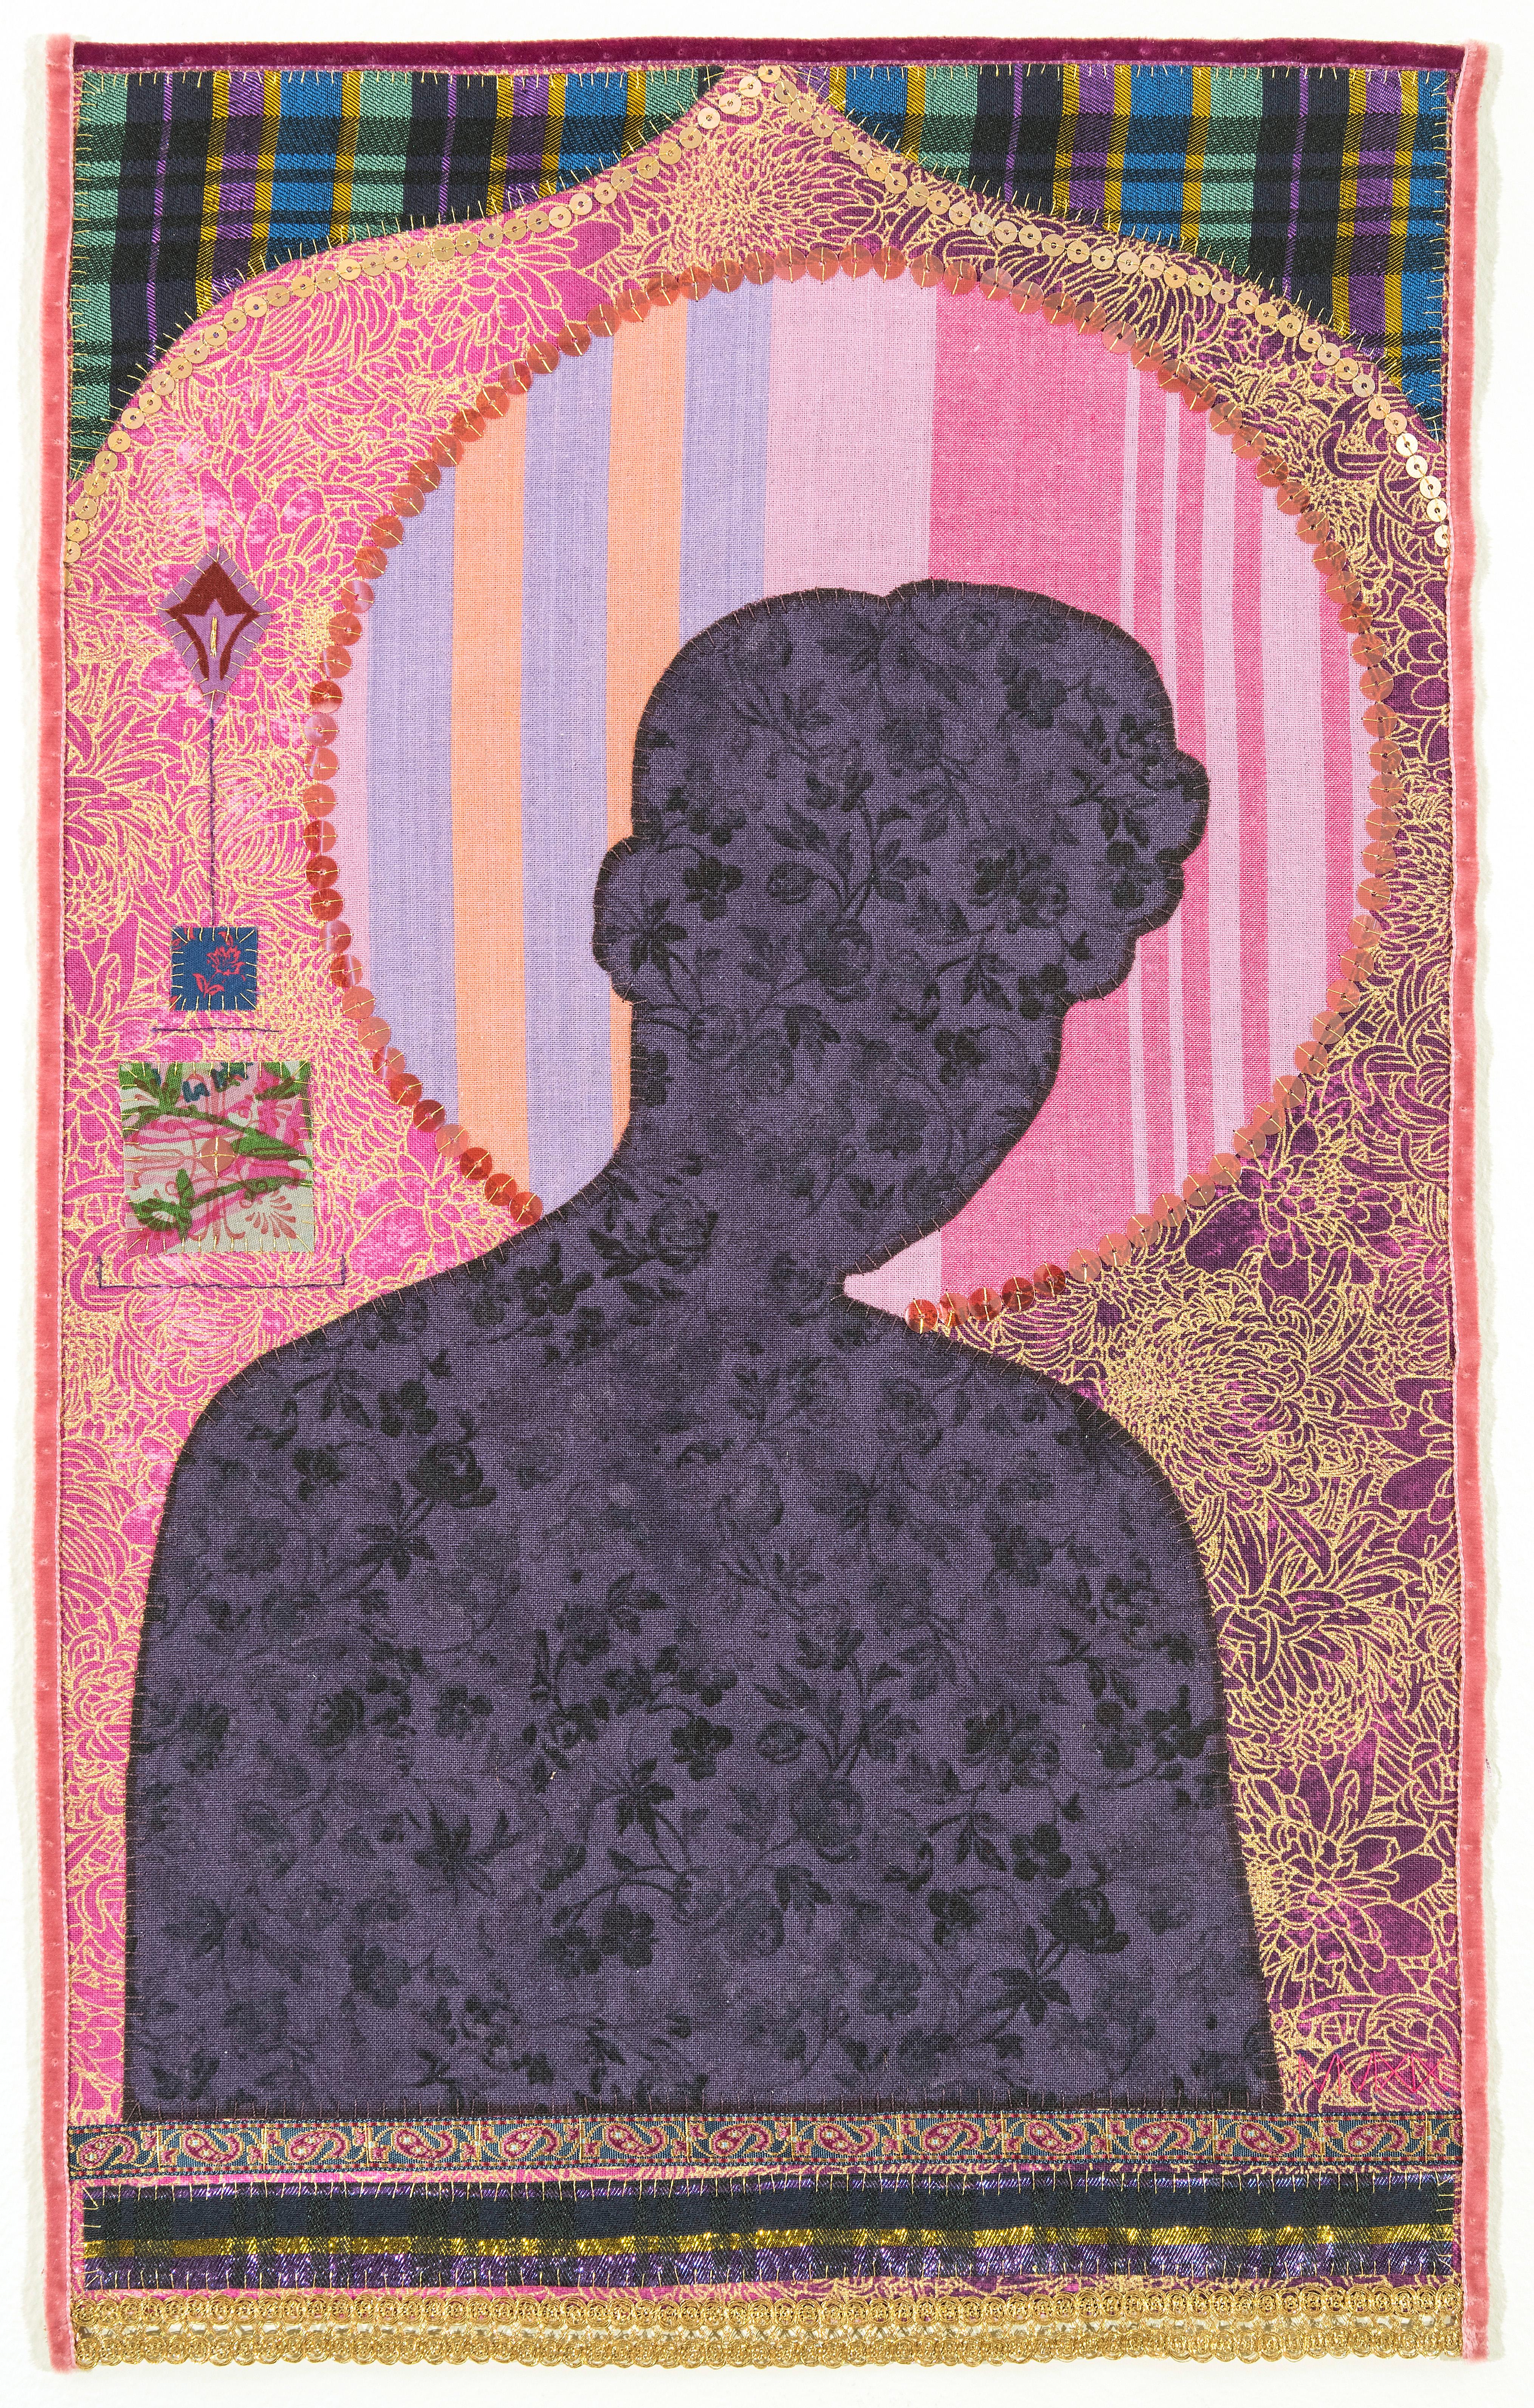 Untitled MM11, silhouette, pattern, textile, icon, purple, pink, gold